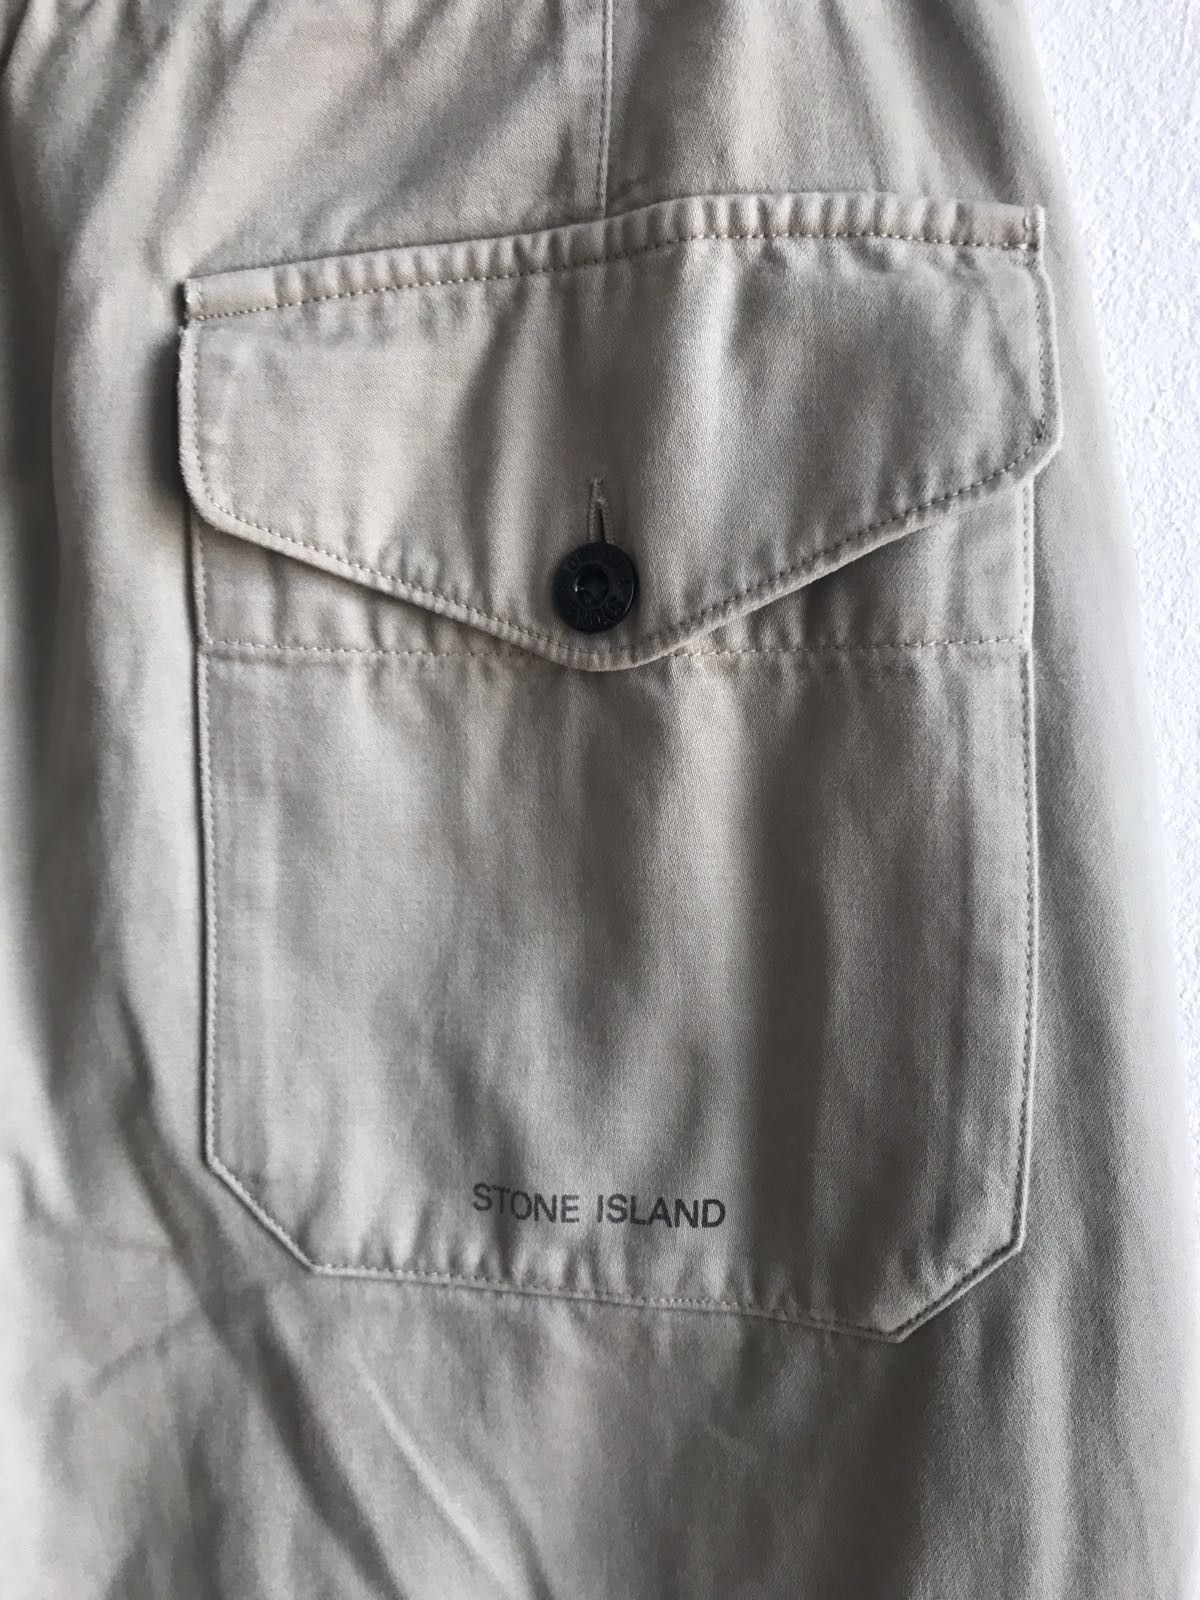 stone island 02ss speed jeans - ワークパンツ